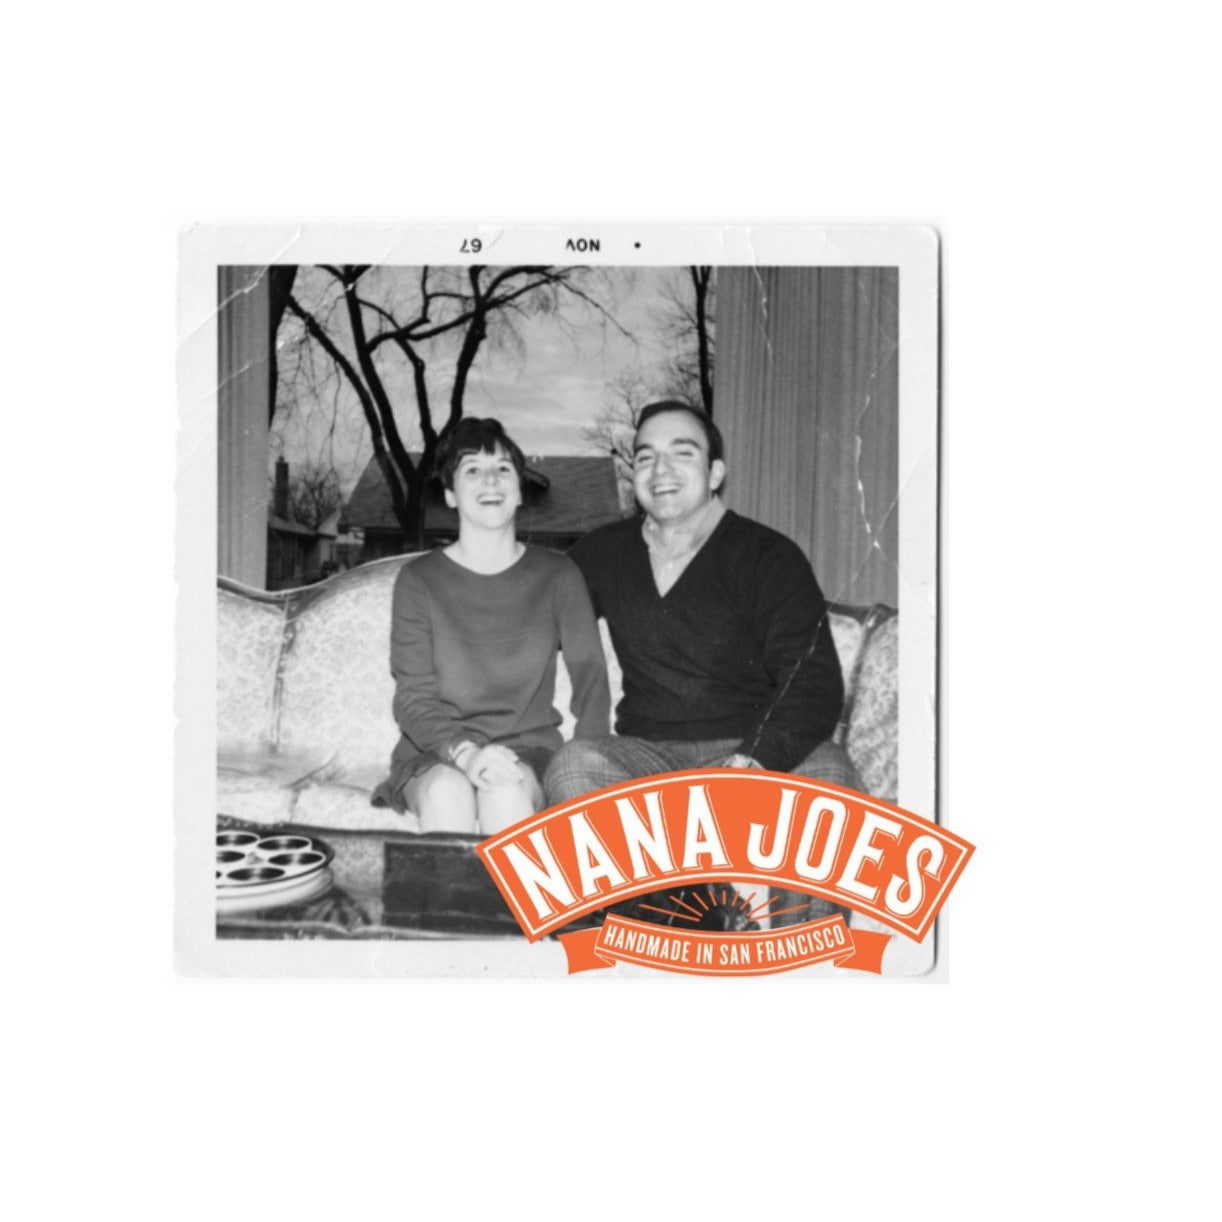 Nana Joes Granola Gift Card - perfect for celiacs and gluten free friends and family